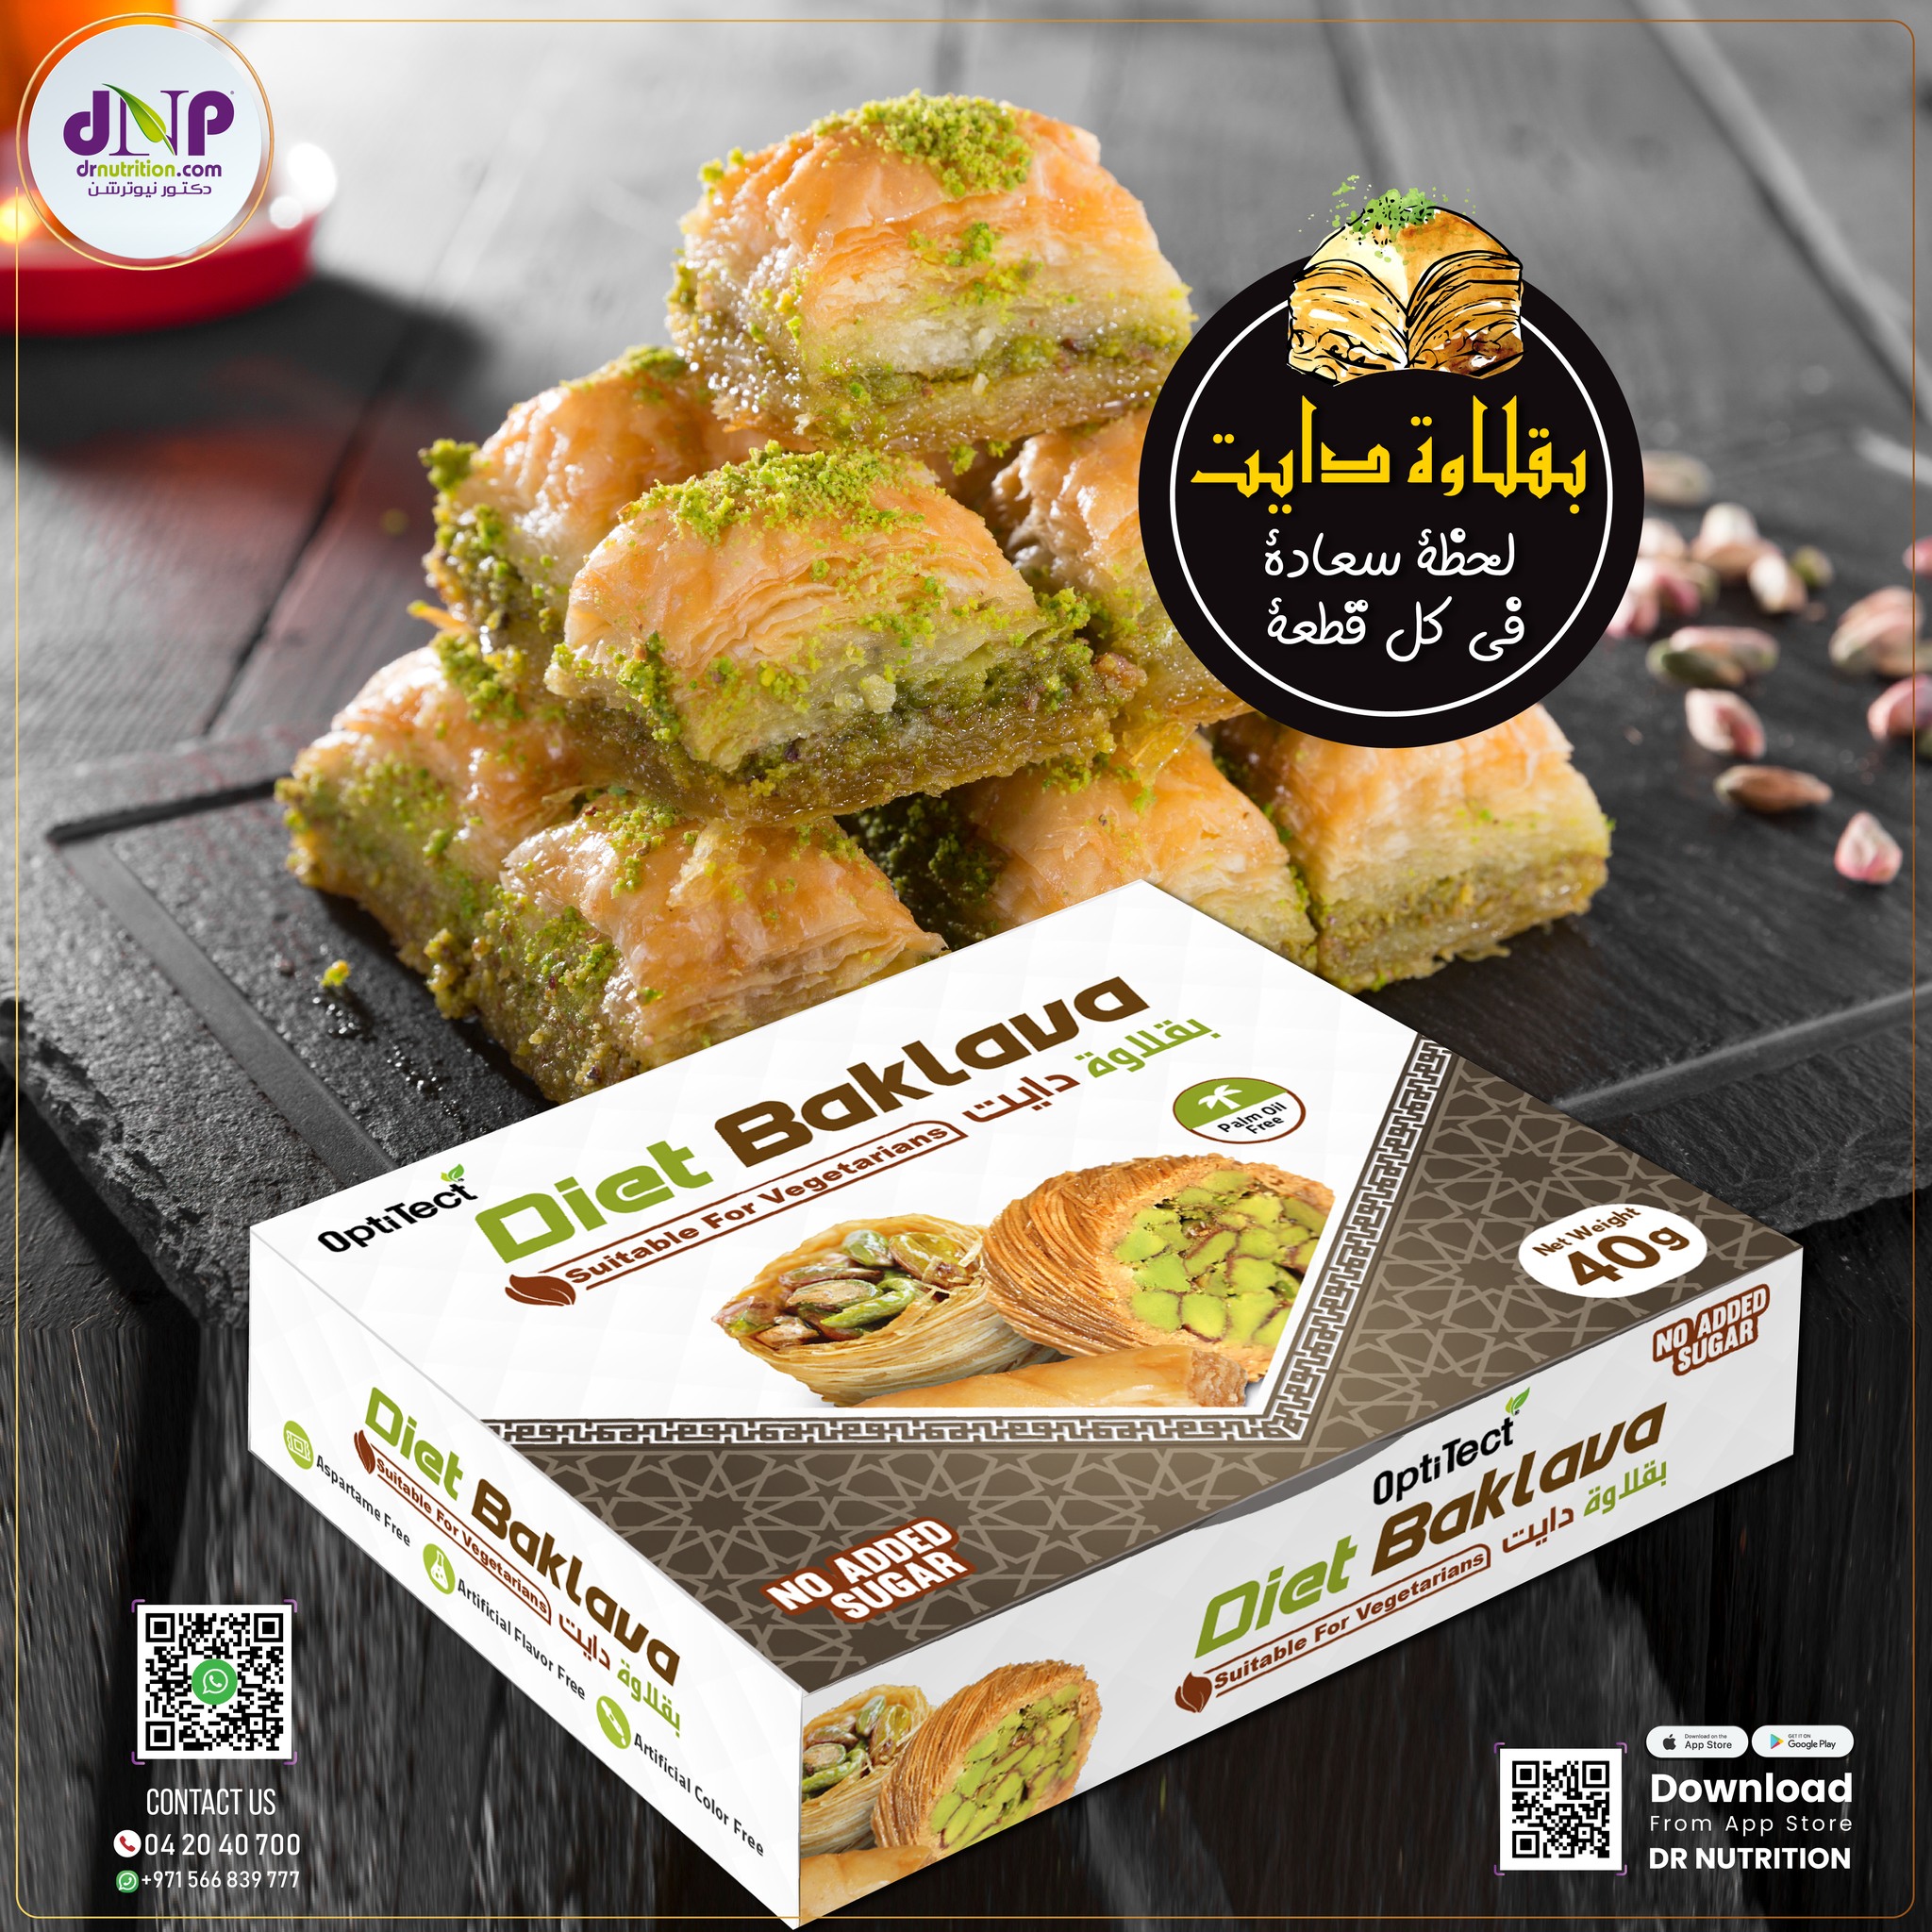 DIET BAKLAVA BY DR NUTRITION OUAE OFFERS